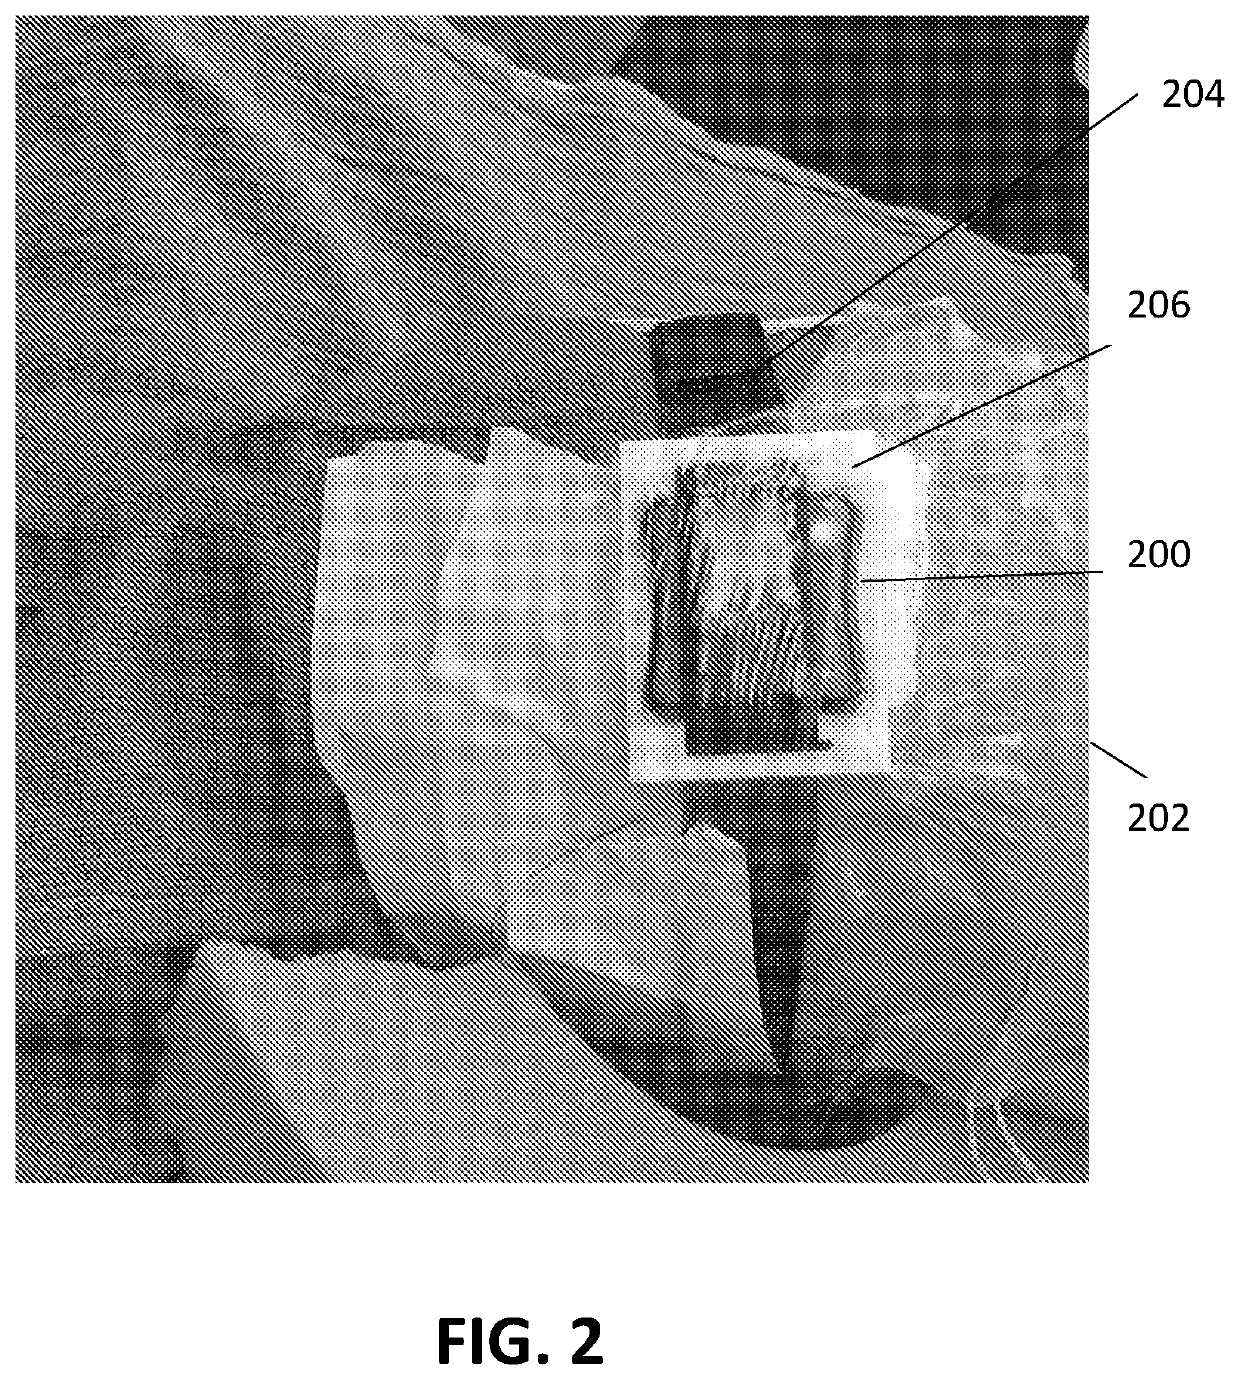 Safety feature for use with robotically manipulated endoscopes and other tools in otolaryngology and neurosurgery